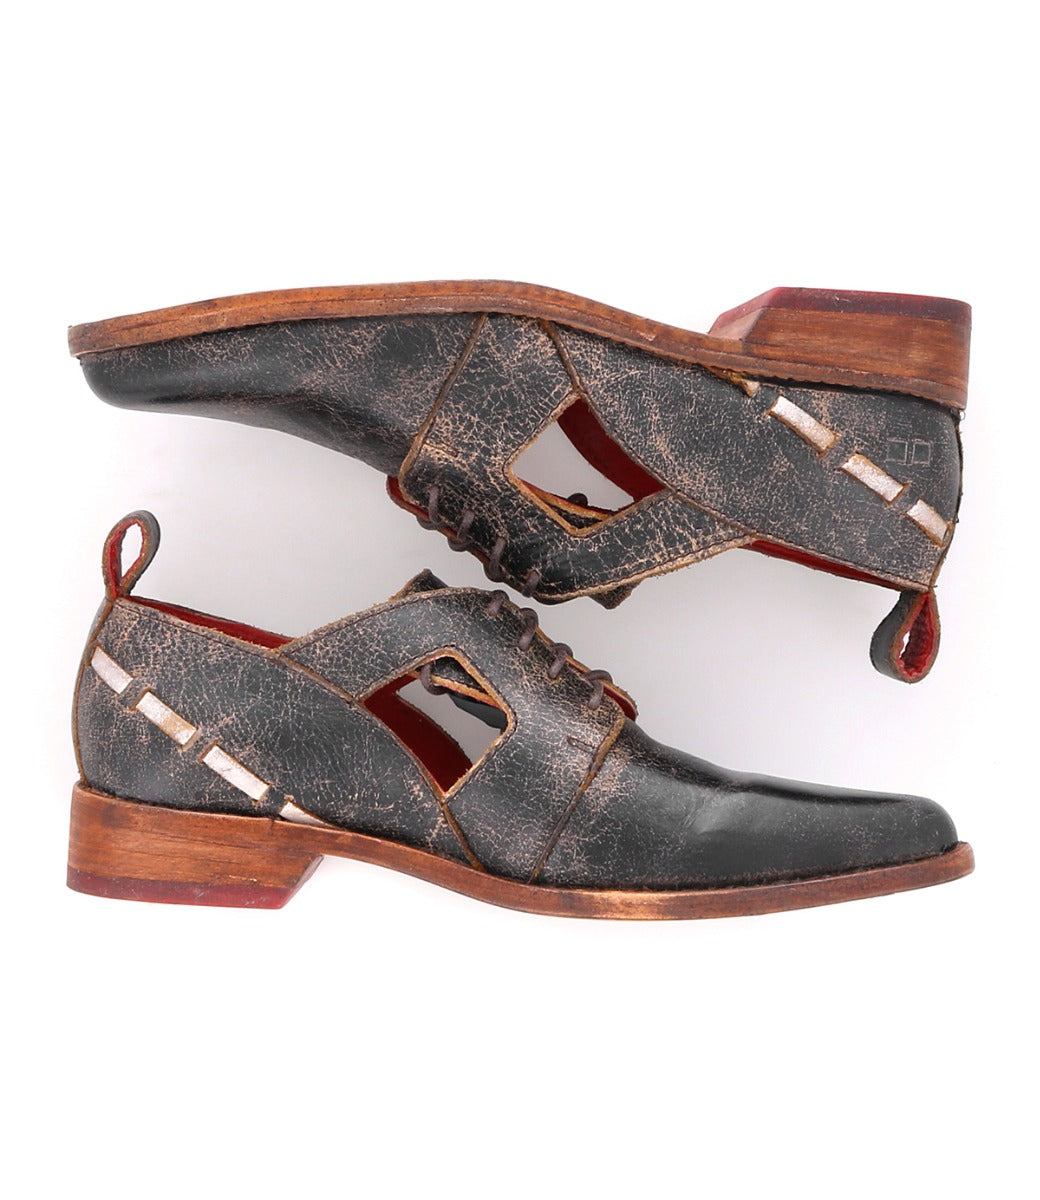 A pair of Neftis men's shoes with brown leather and wooden soles from Bed Stu.